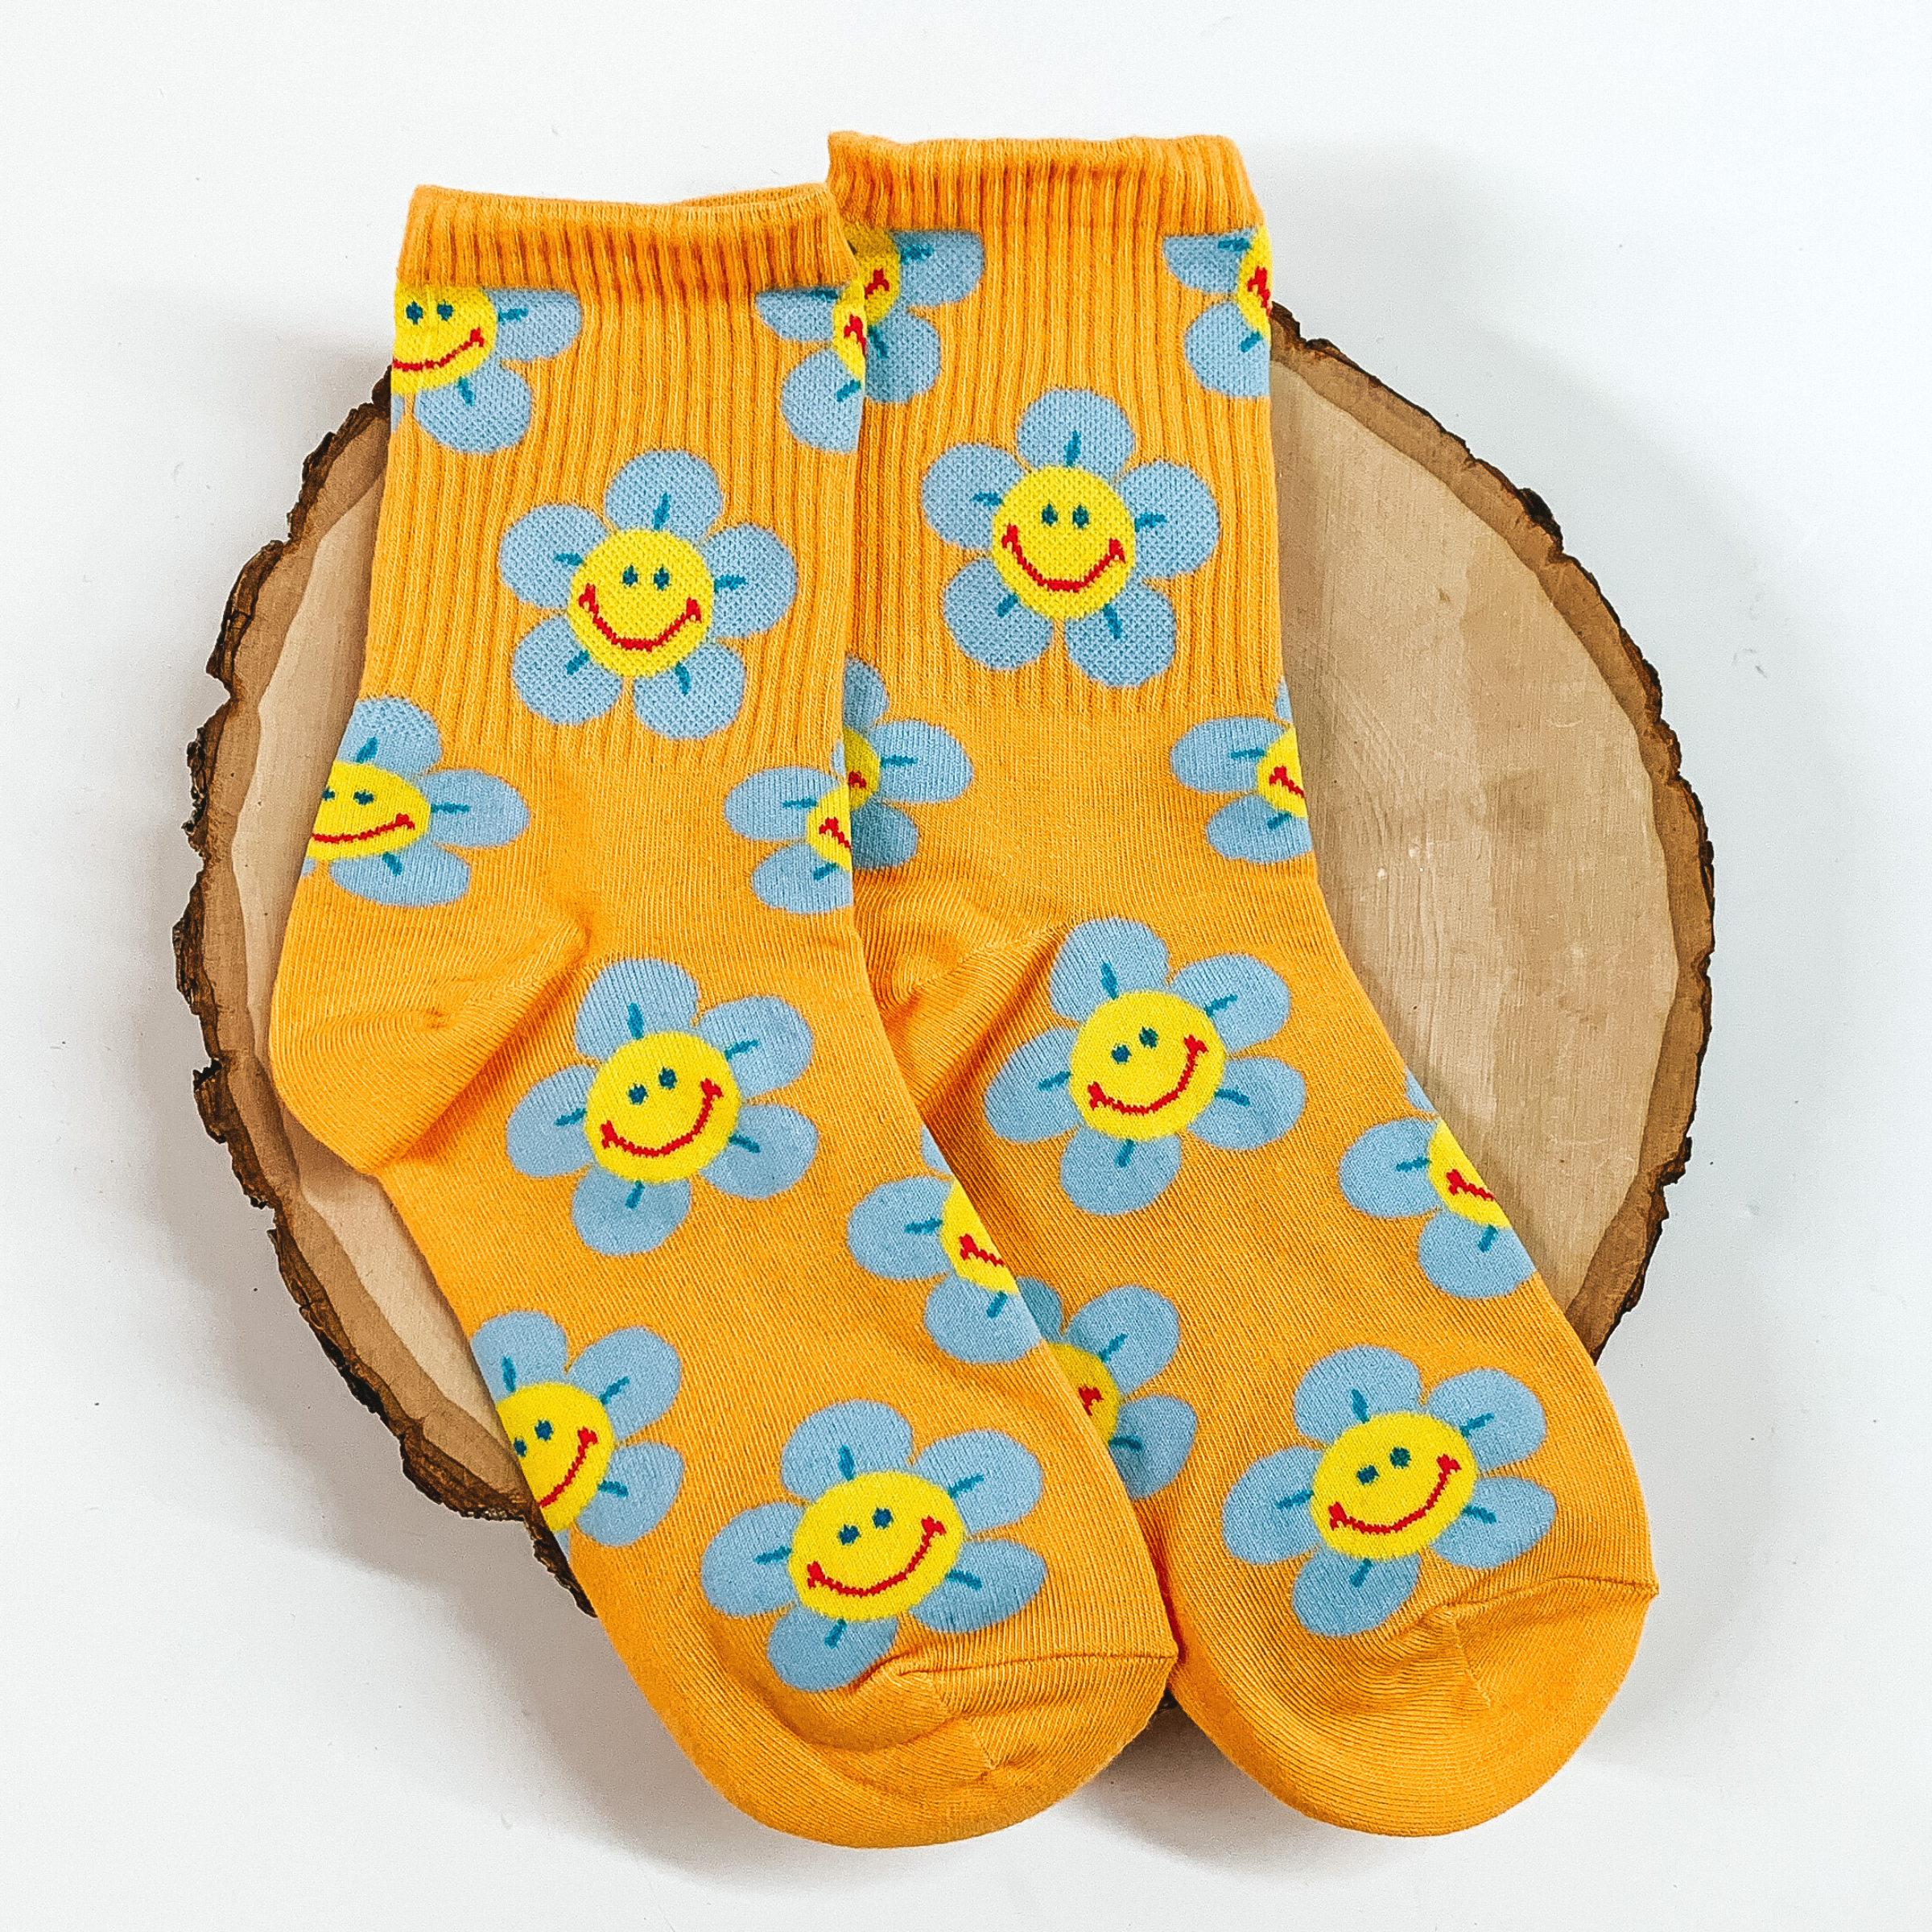 Orange ankle socks with a blue flower print. The flowers have a smiley face in the center. These socks are pictured on a piece of wood on a white background. 